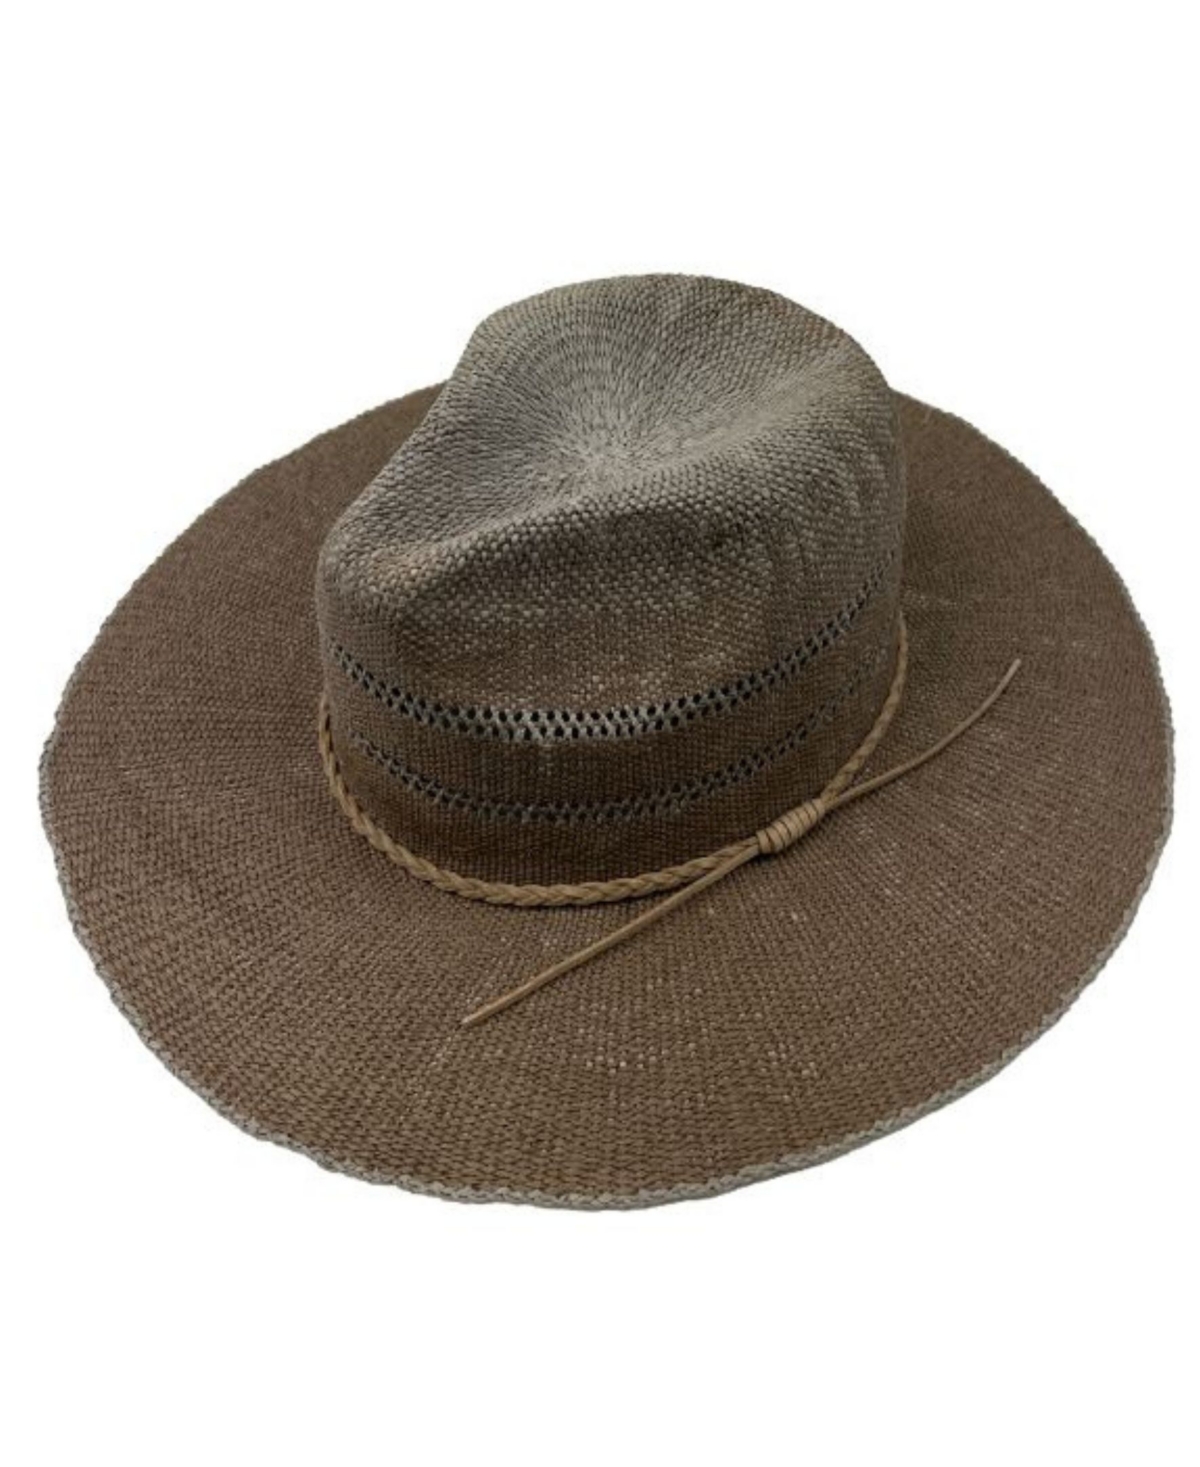 Marcus Adler Faux Suede Braided Trim With Straw Panama Hat In Taupe